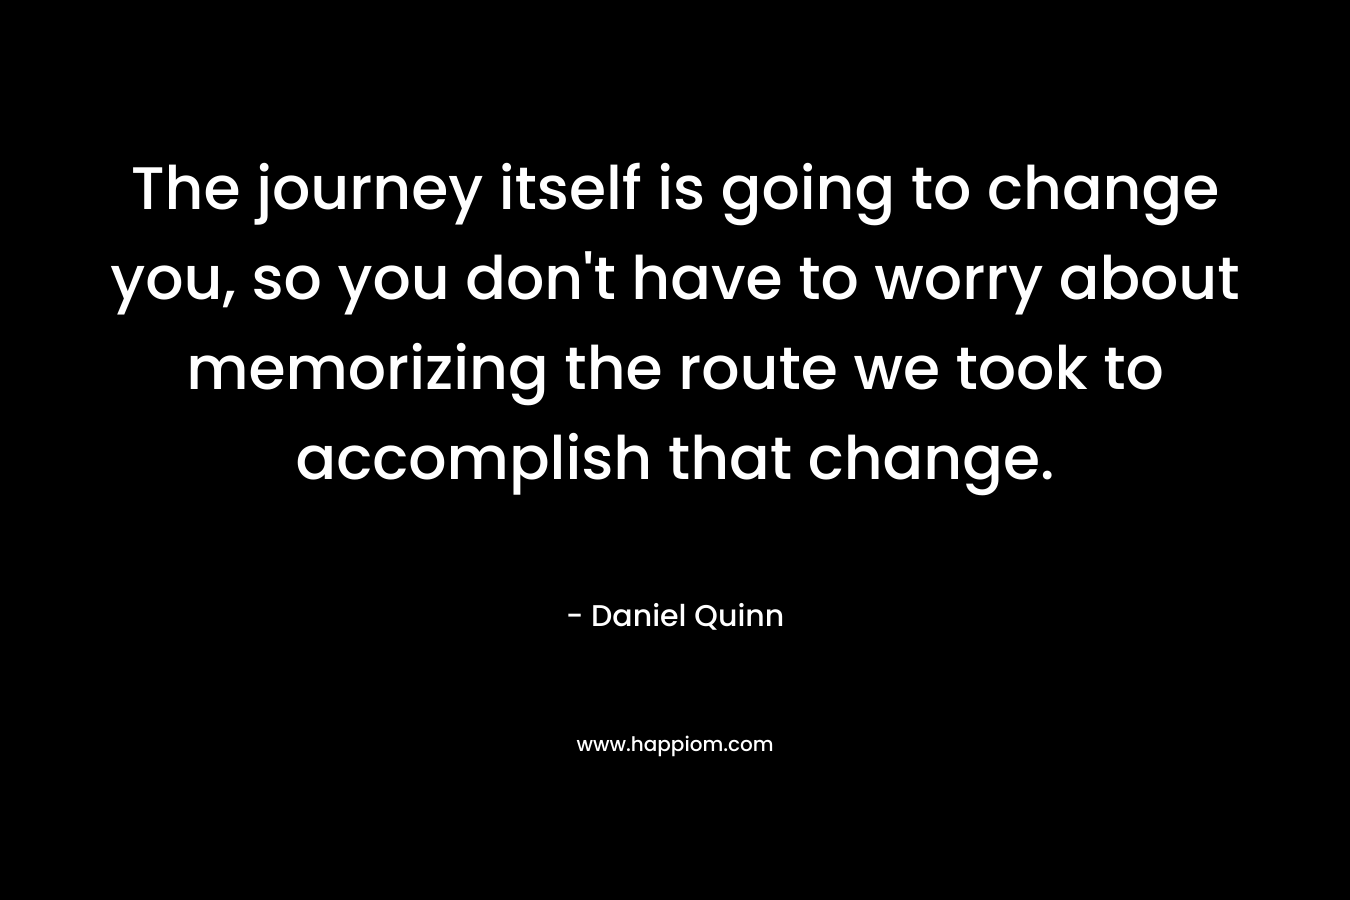 The journey itself is going to change you, so you don't have to worry about memorizing the route we took to accomplish that change.